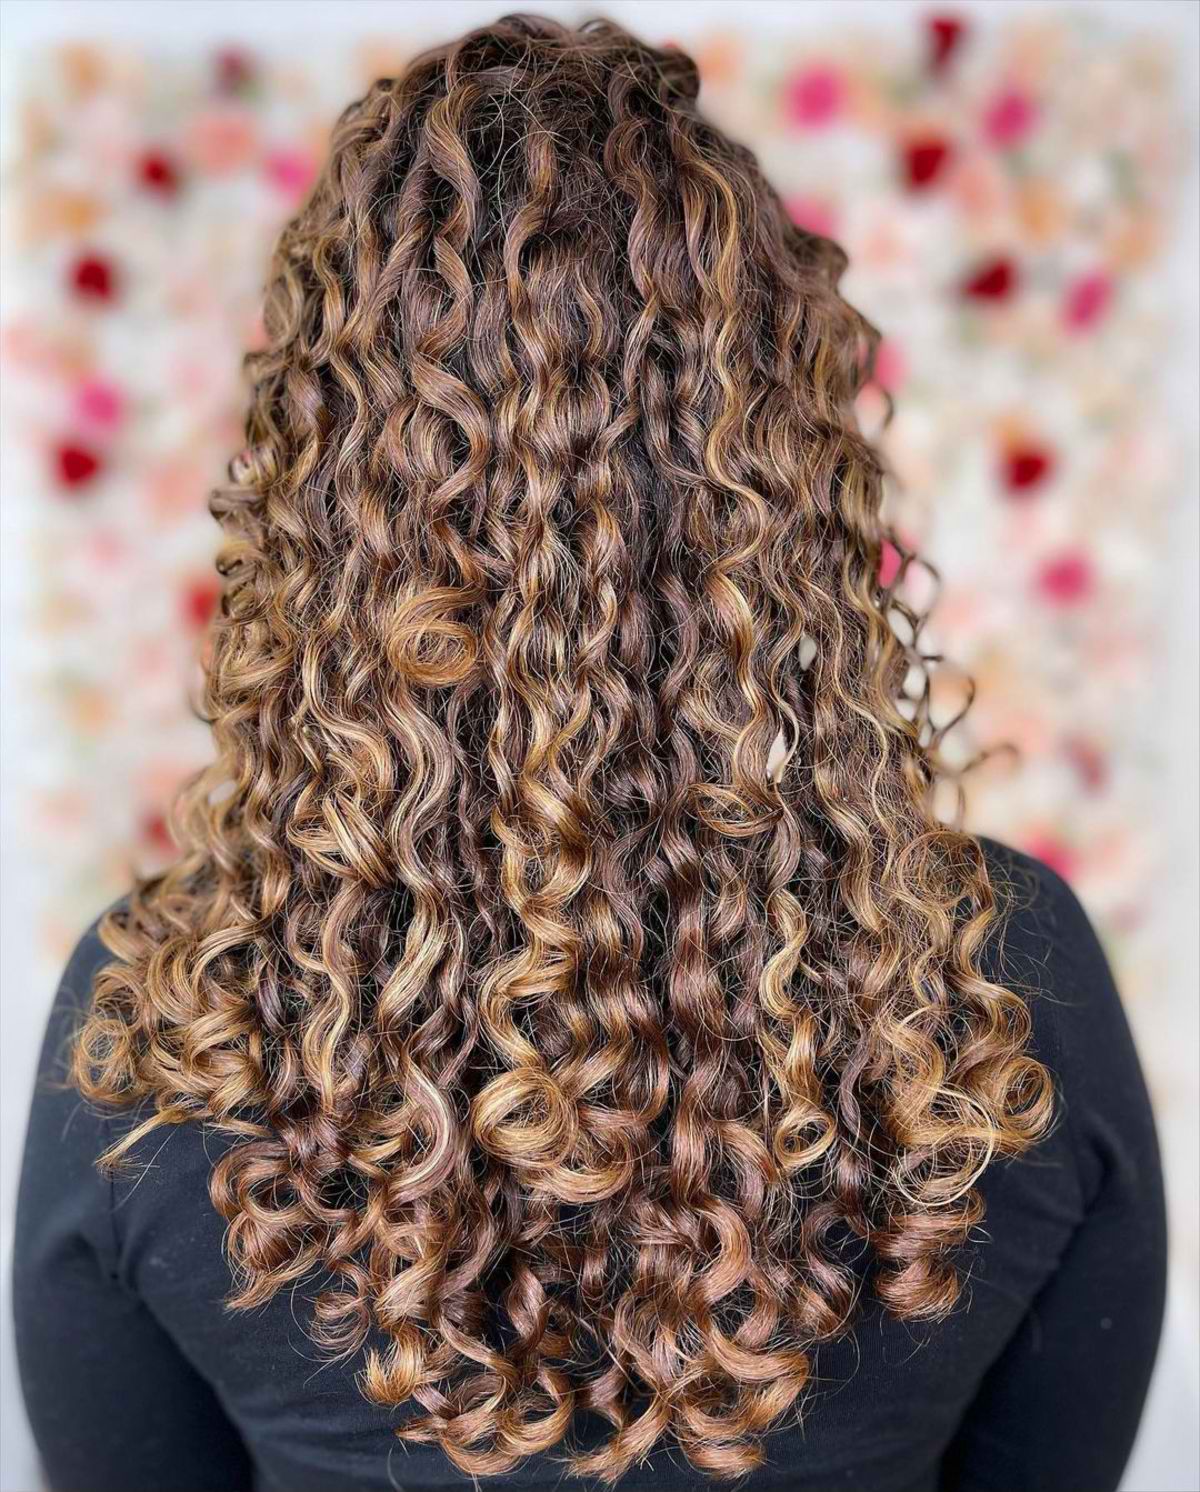 Natural spiral curls for long hair with honey blonde balayage